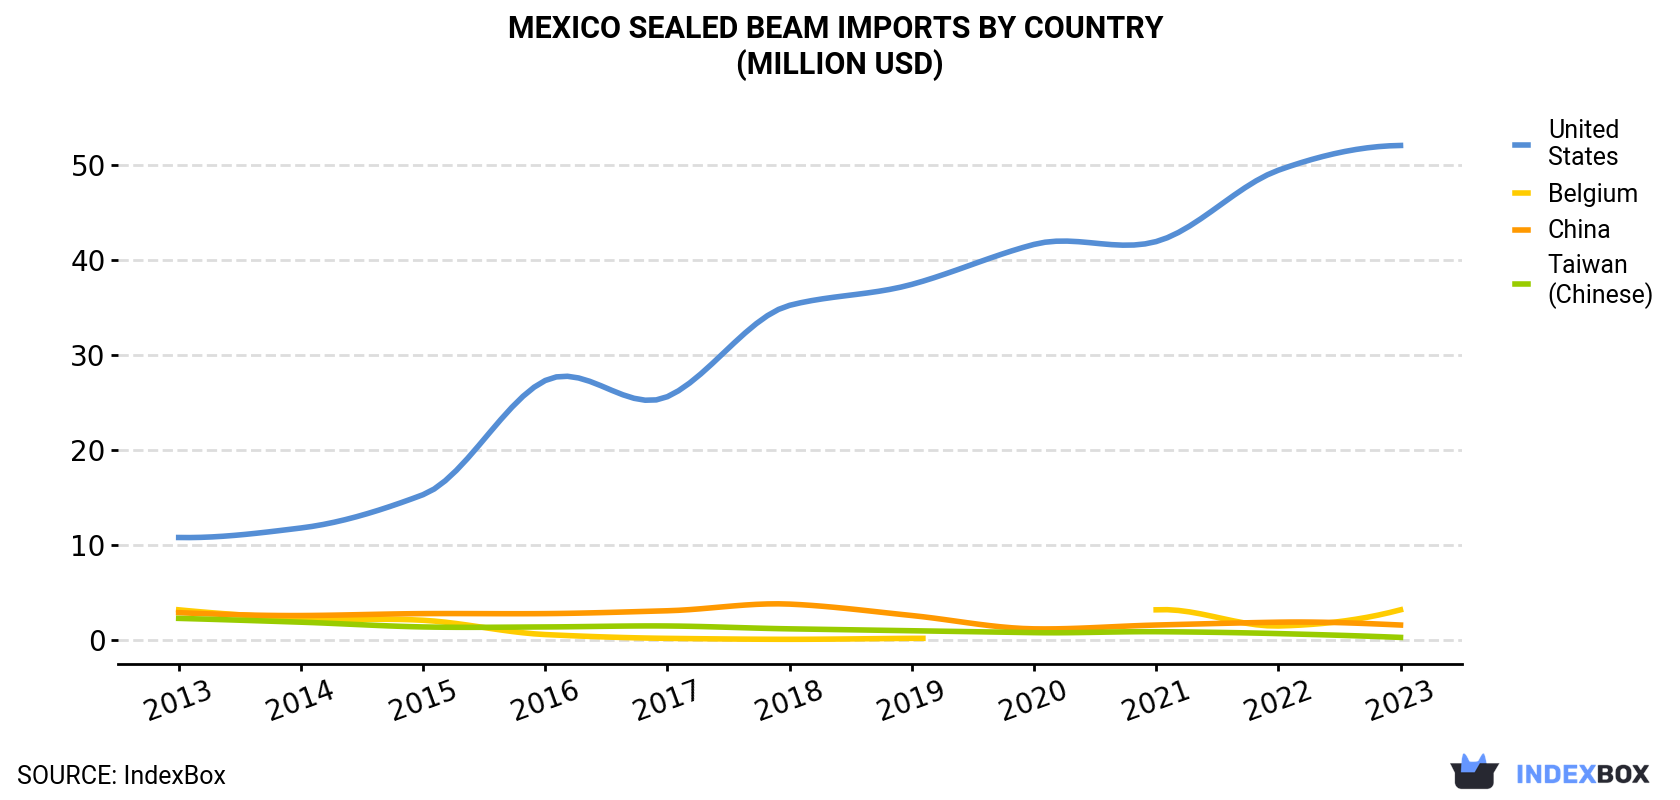 Mexico Sealed Beam Imports By Country (Million USD)